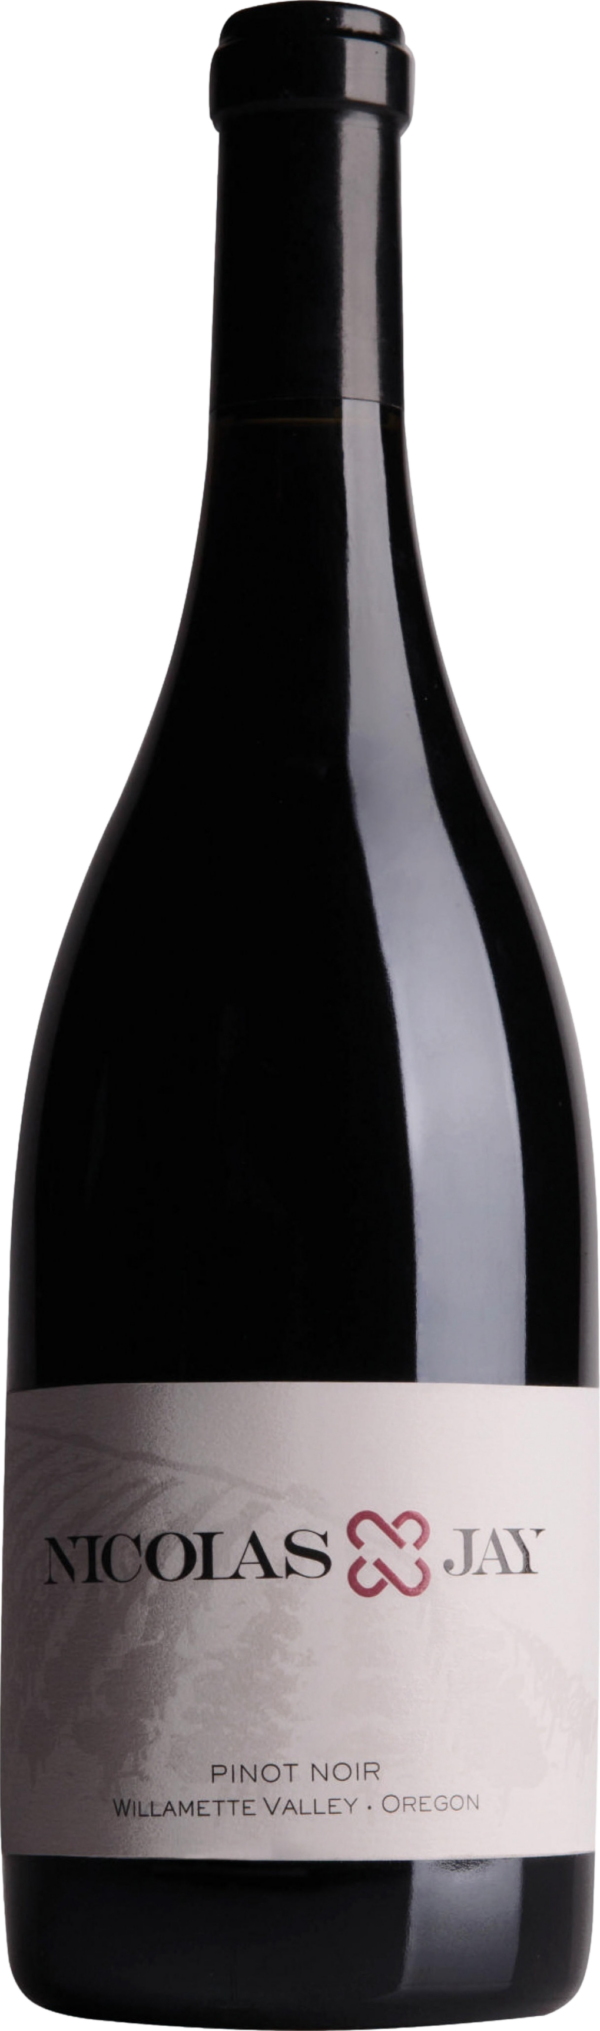 Product image of Nicolas Jay Pinot Noir Willamette Valley 2016 from 8wines